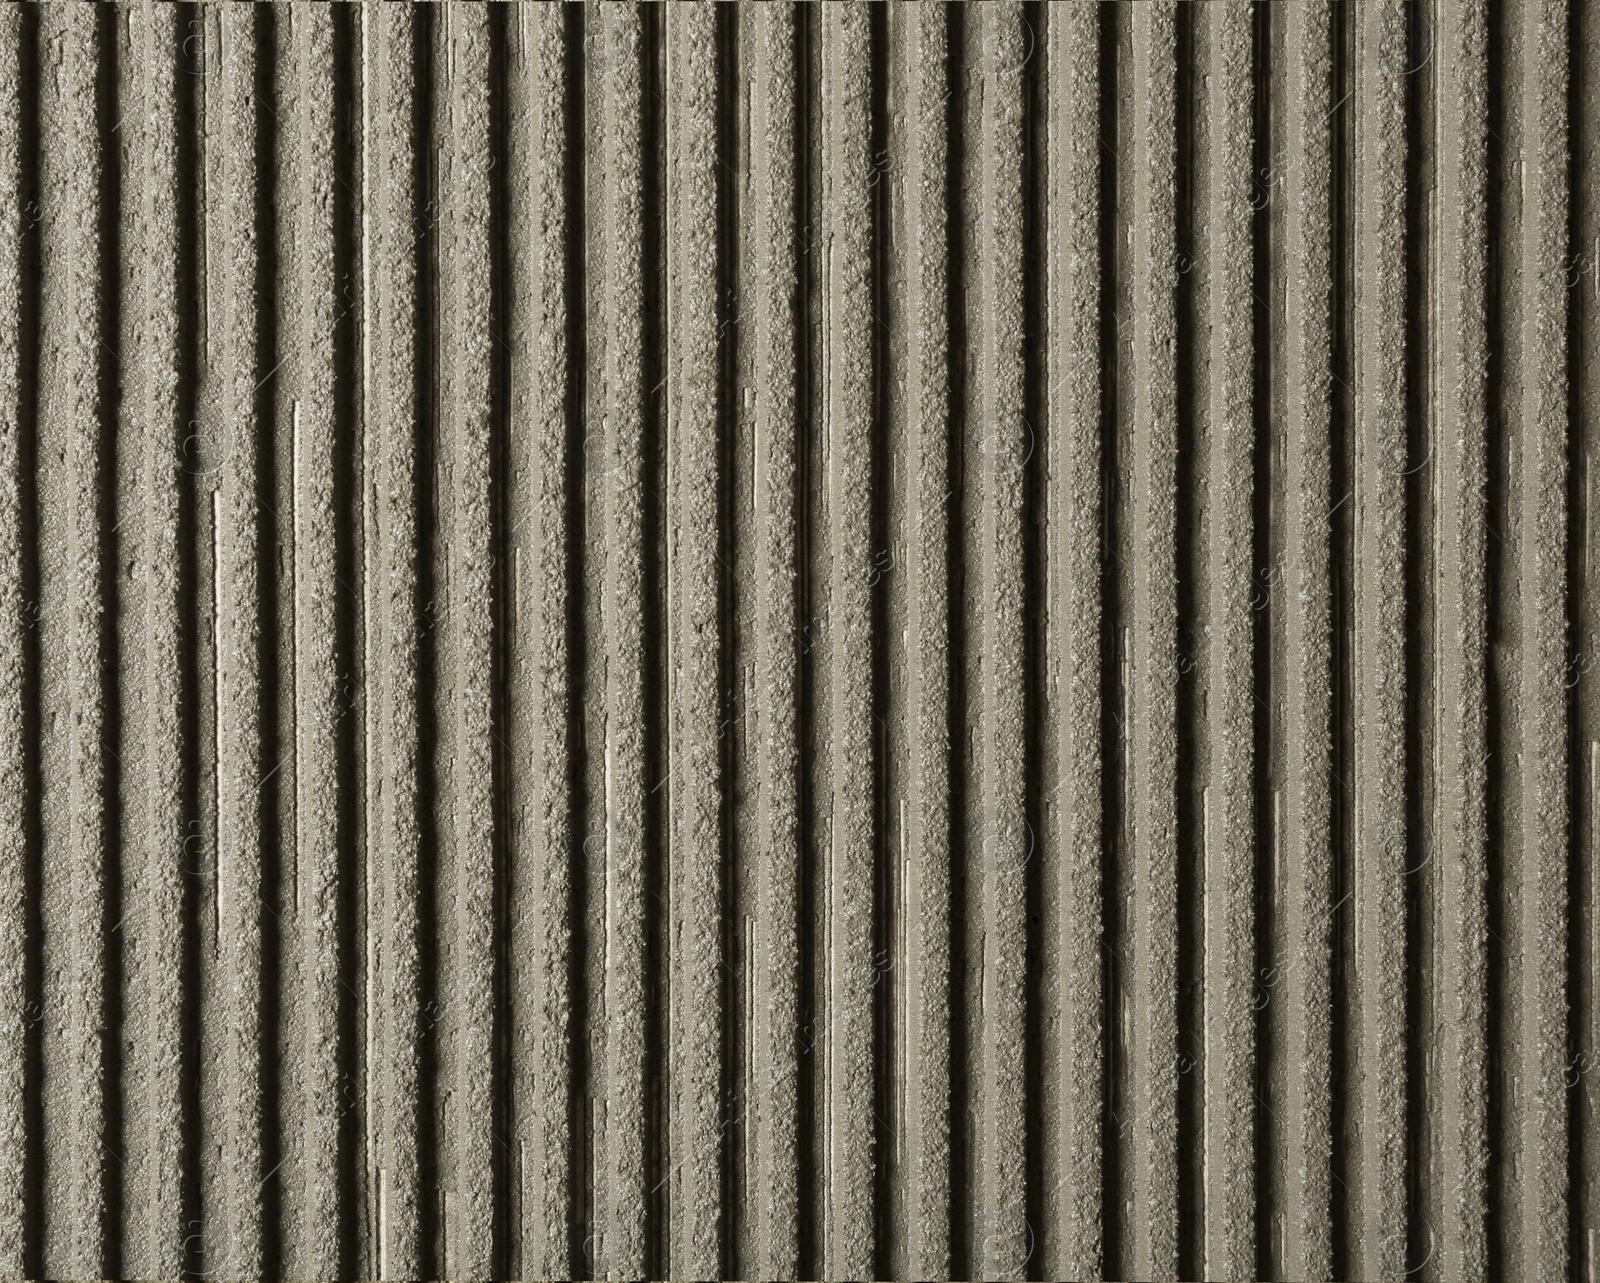 Photo of Lined grey concrete as background, top view. Tile installation